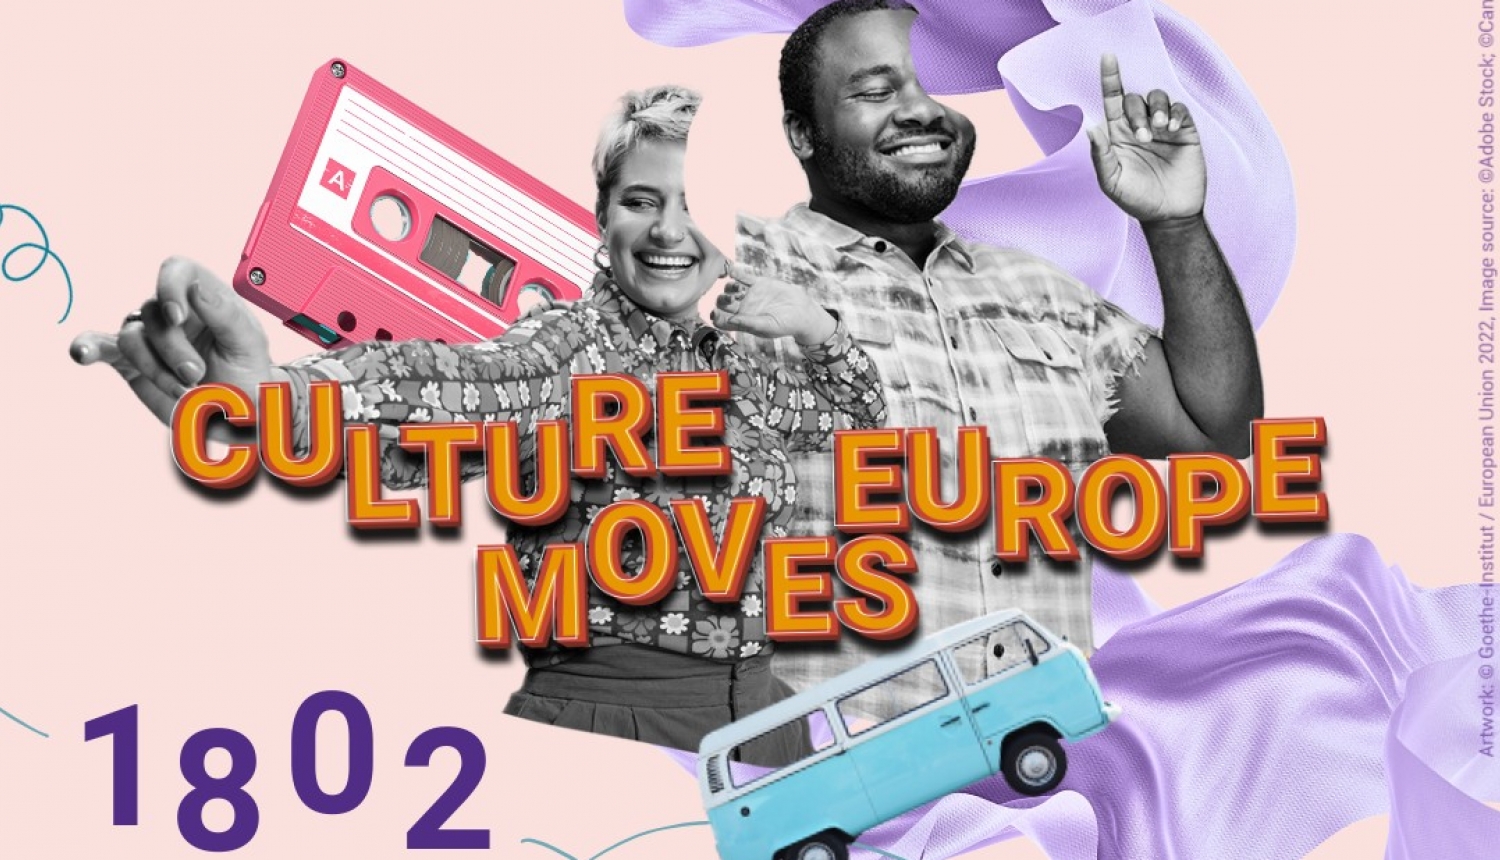 culture moves europe visual material with people